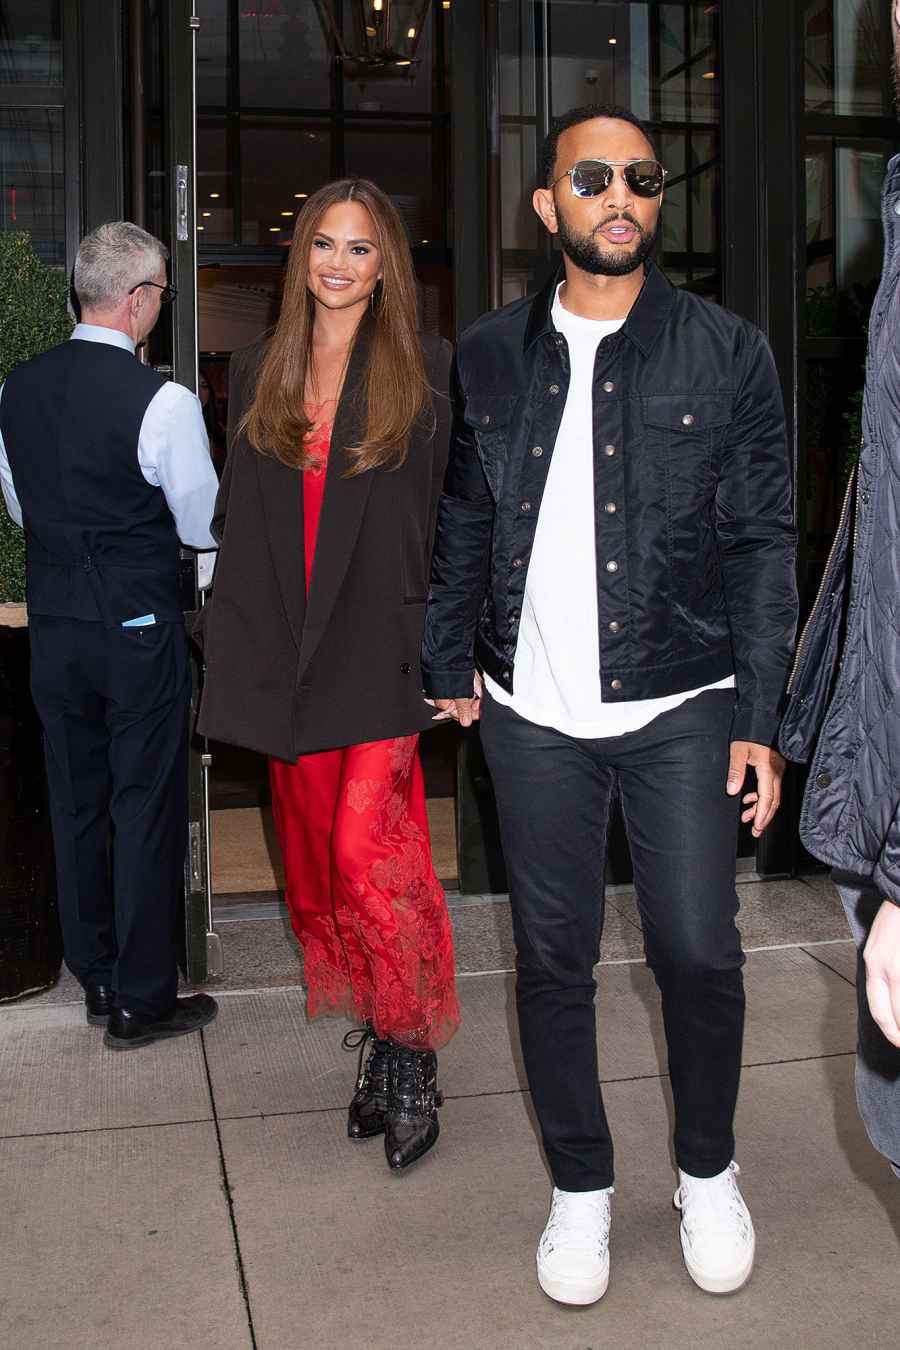 Chrissy Teigen and John Legend’s Funniest Trolling Moments 05 out and about, New York, USA - 26 Apr 2022